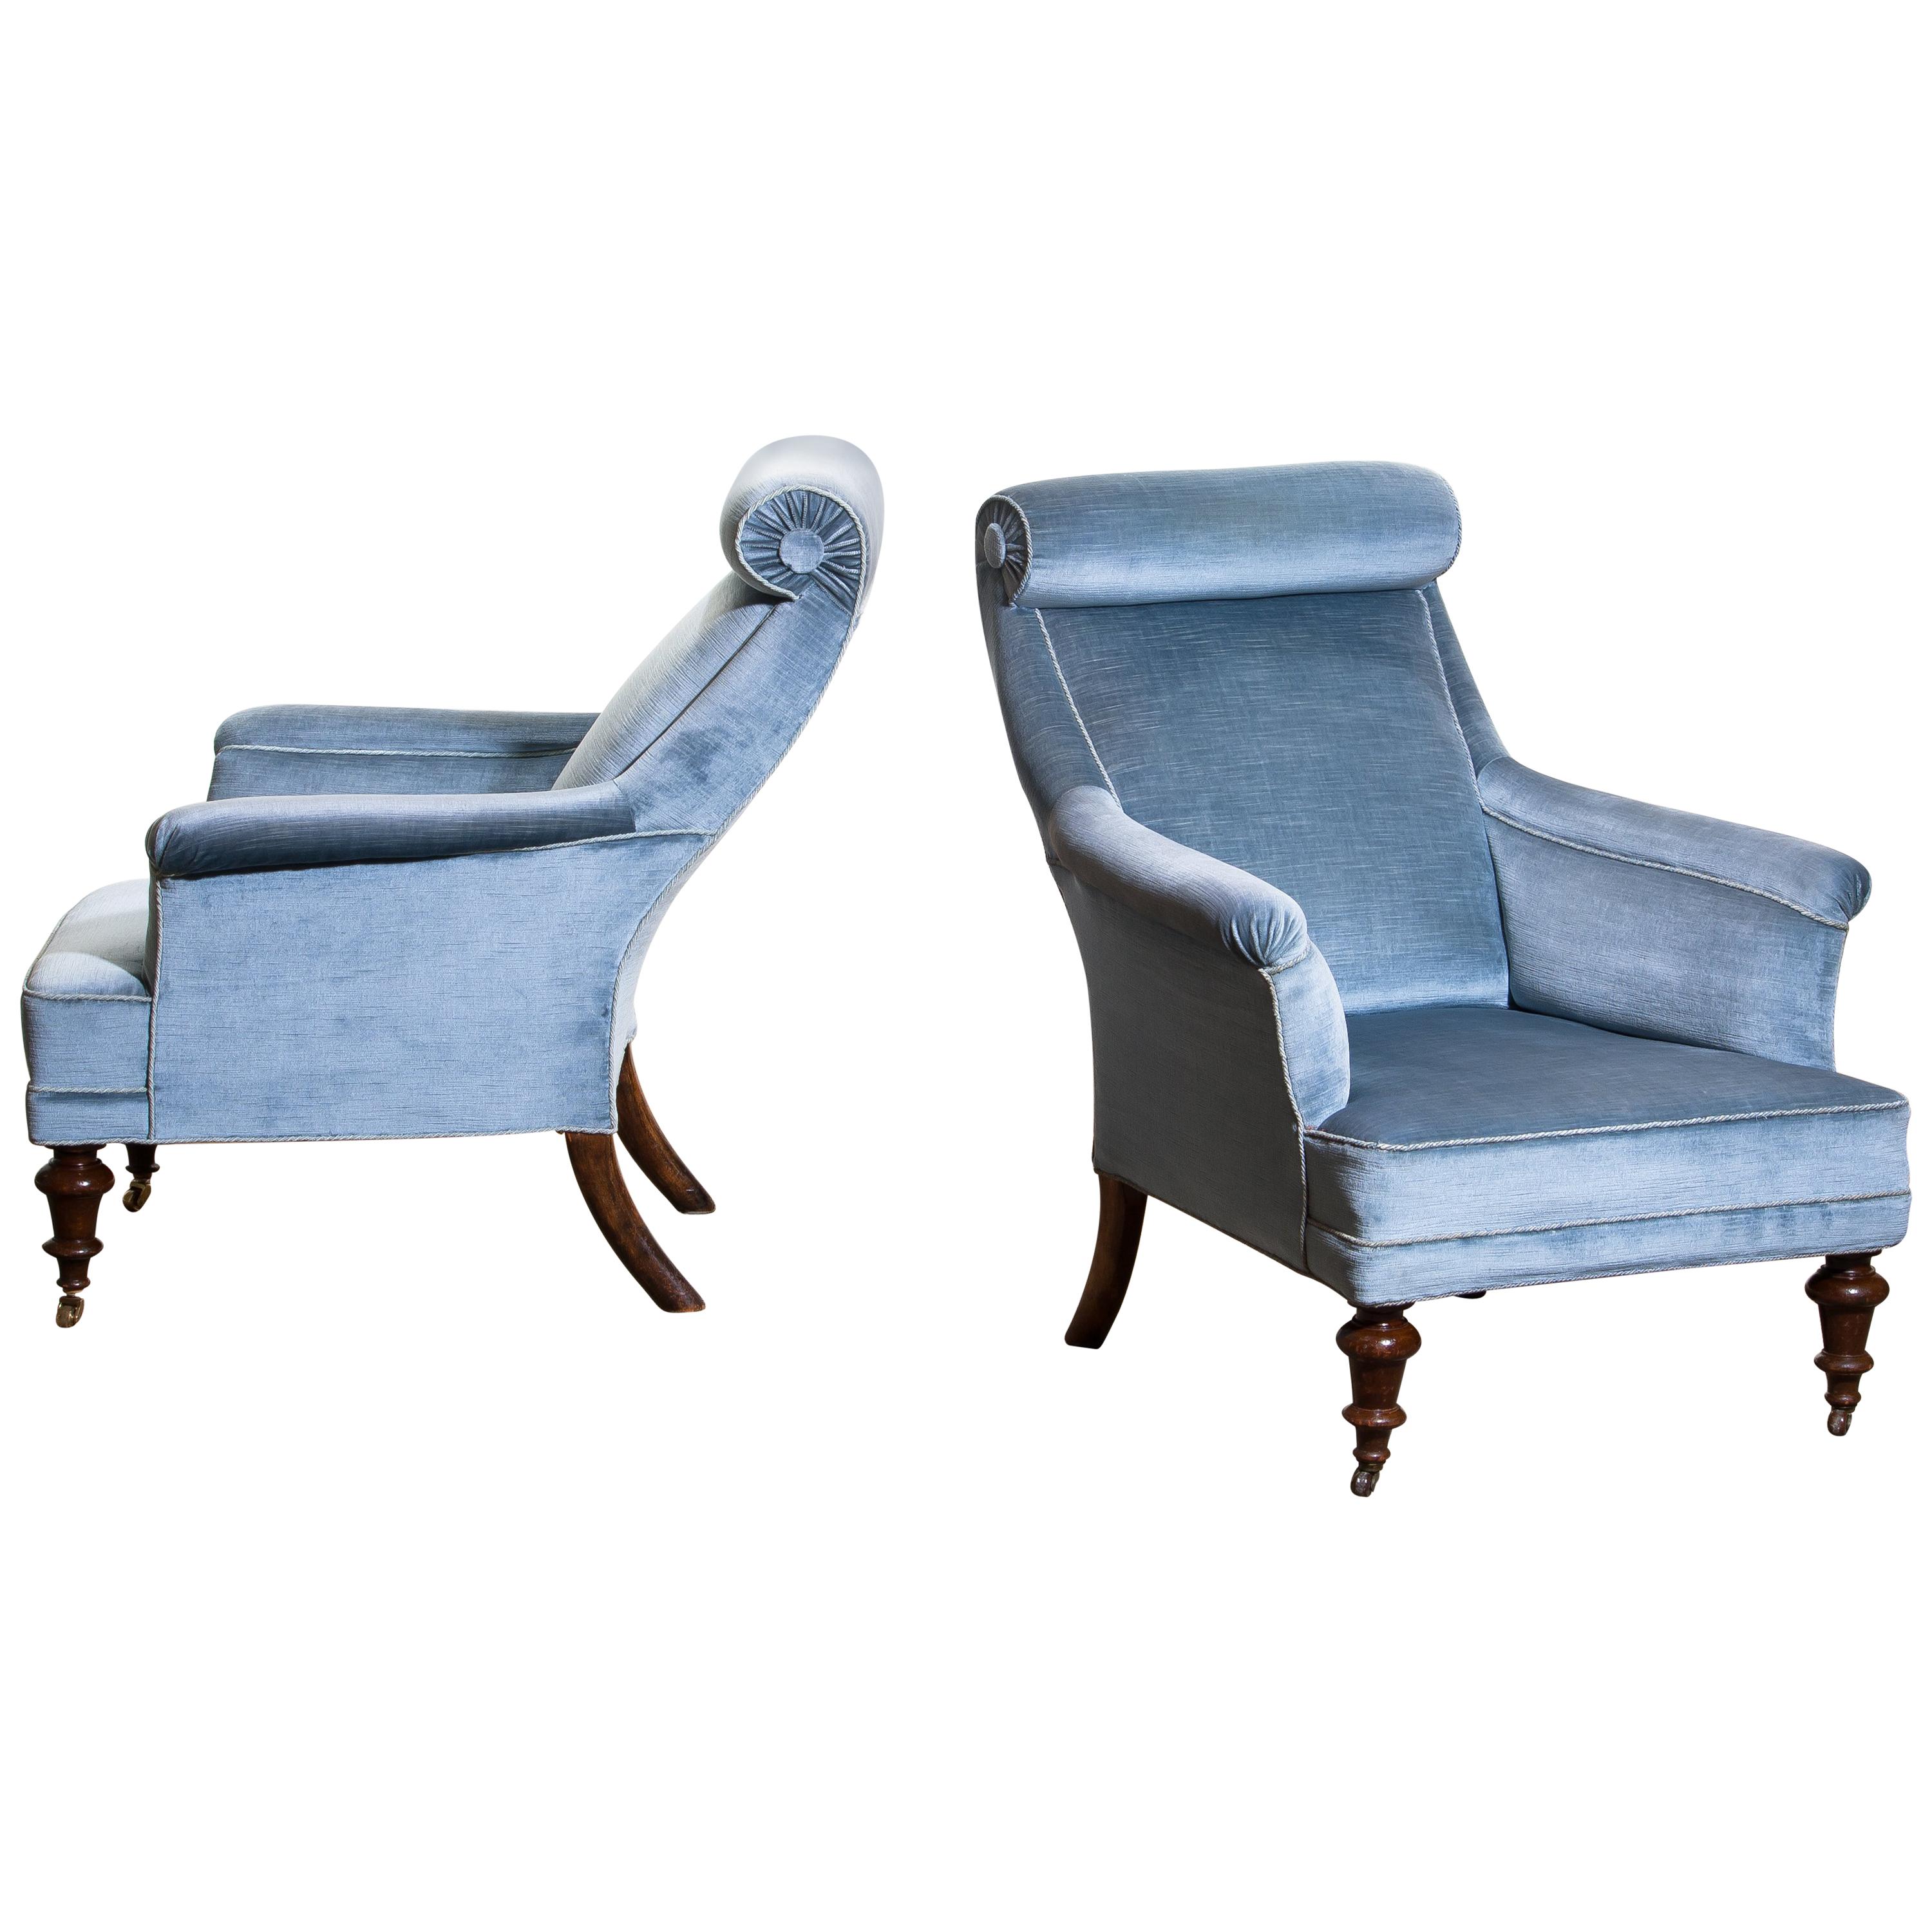 1900s Set of Two Ice Blue Velvet Dorothy Draper Style Bergère / Lounge Chairs In Good Condition In Silvolde, Gelderland